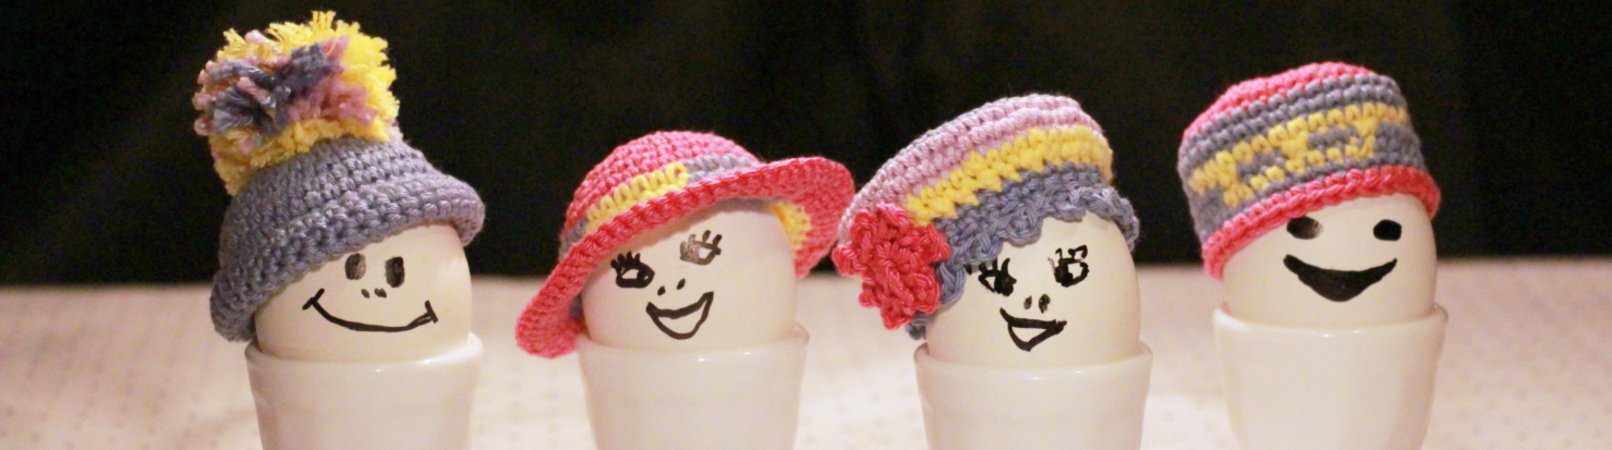 Funny egg hats - For Easter and always! Egg warmers